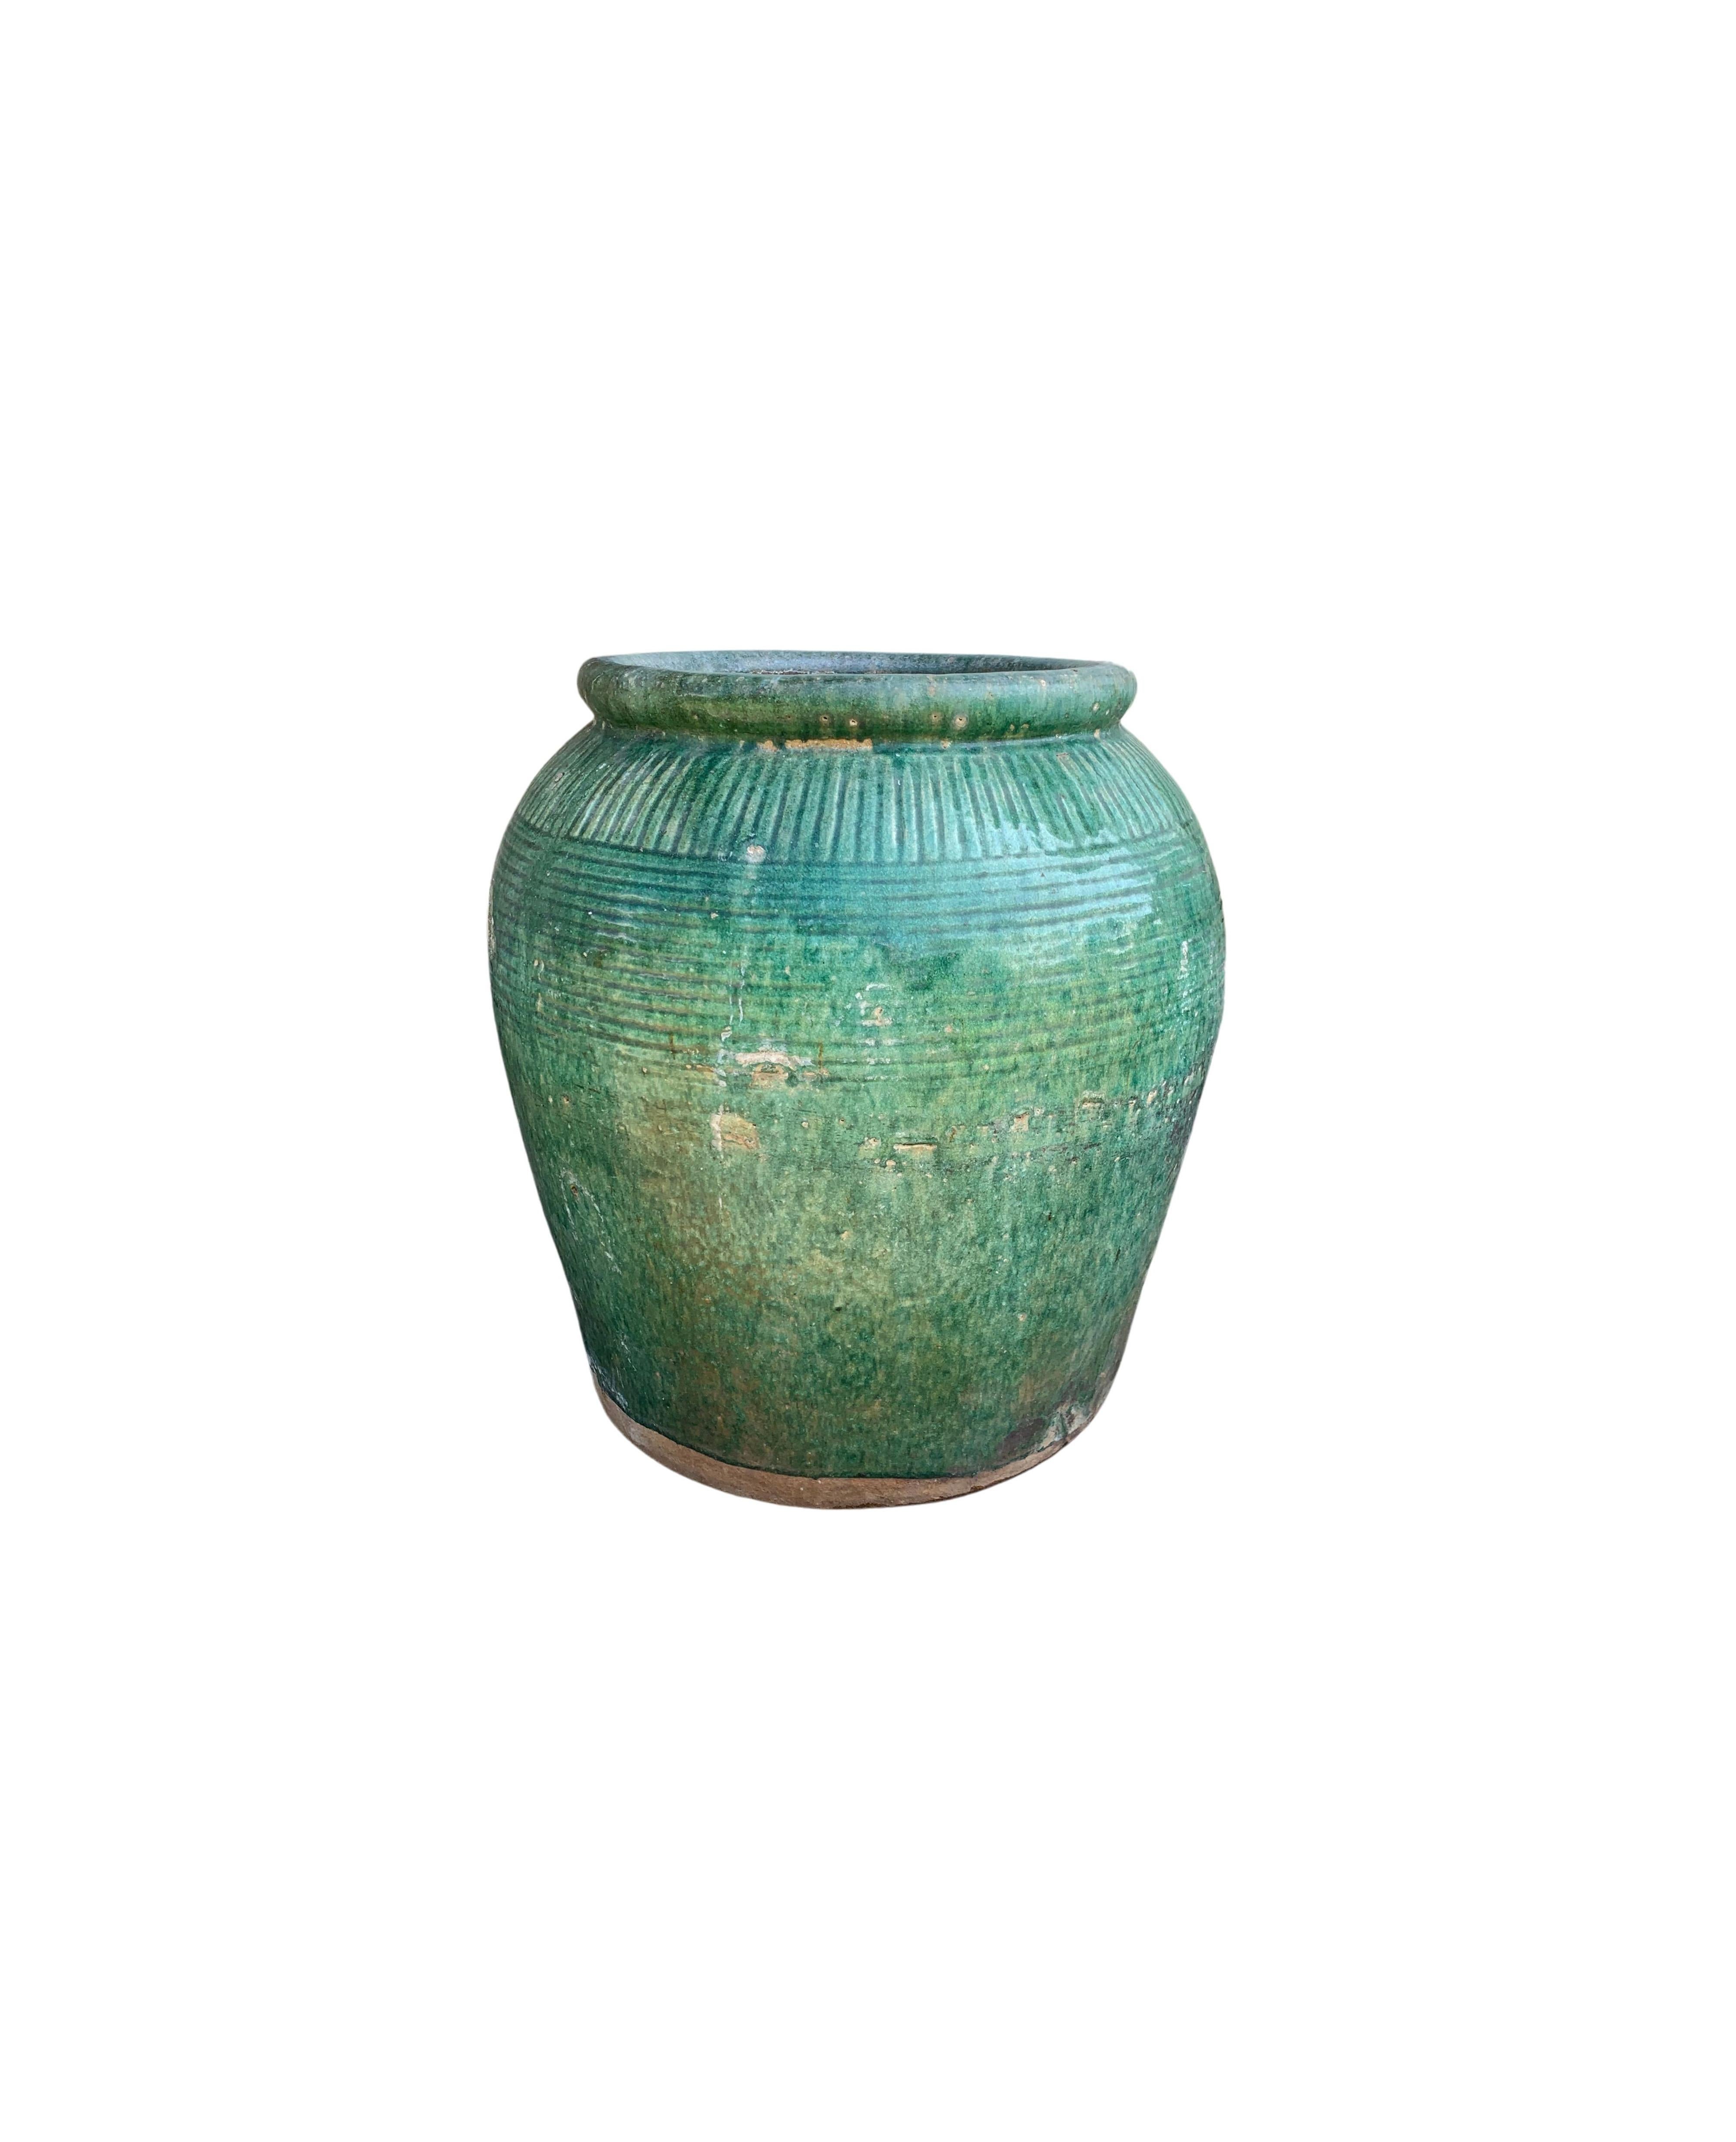 This glazed Chinese ceramic jar from the turn of the 19th Century was once used for soy sauce production. It features a wonderful green glazed finish and outer surface that features a ribbed texture. A great example of Chinese pottery, with its